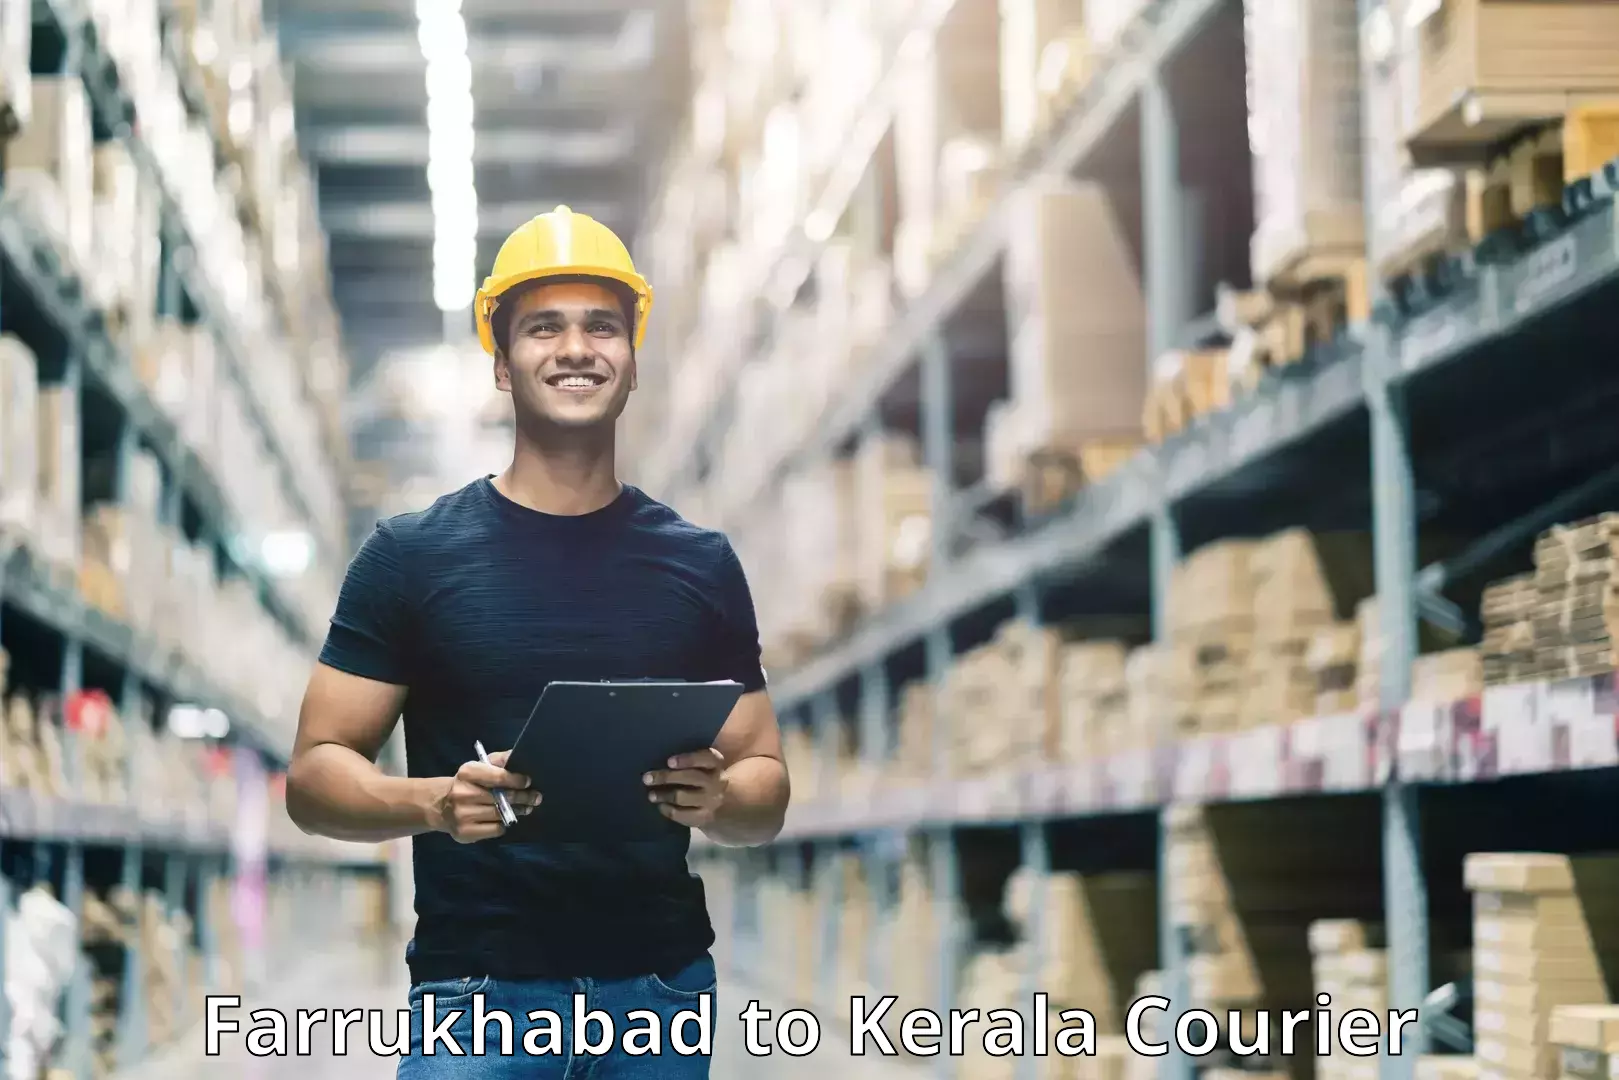 Easy access courier services in Farrukhabad to Kochi